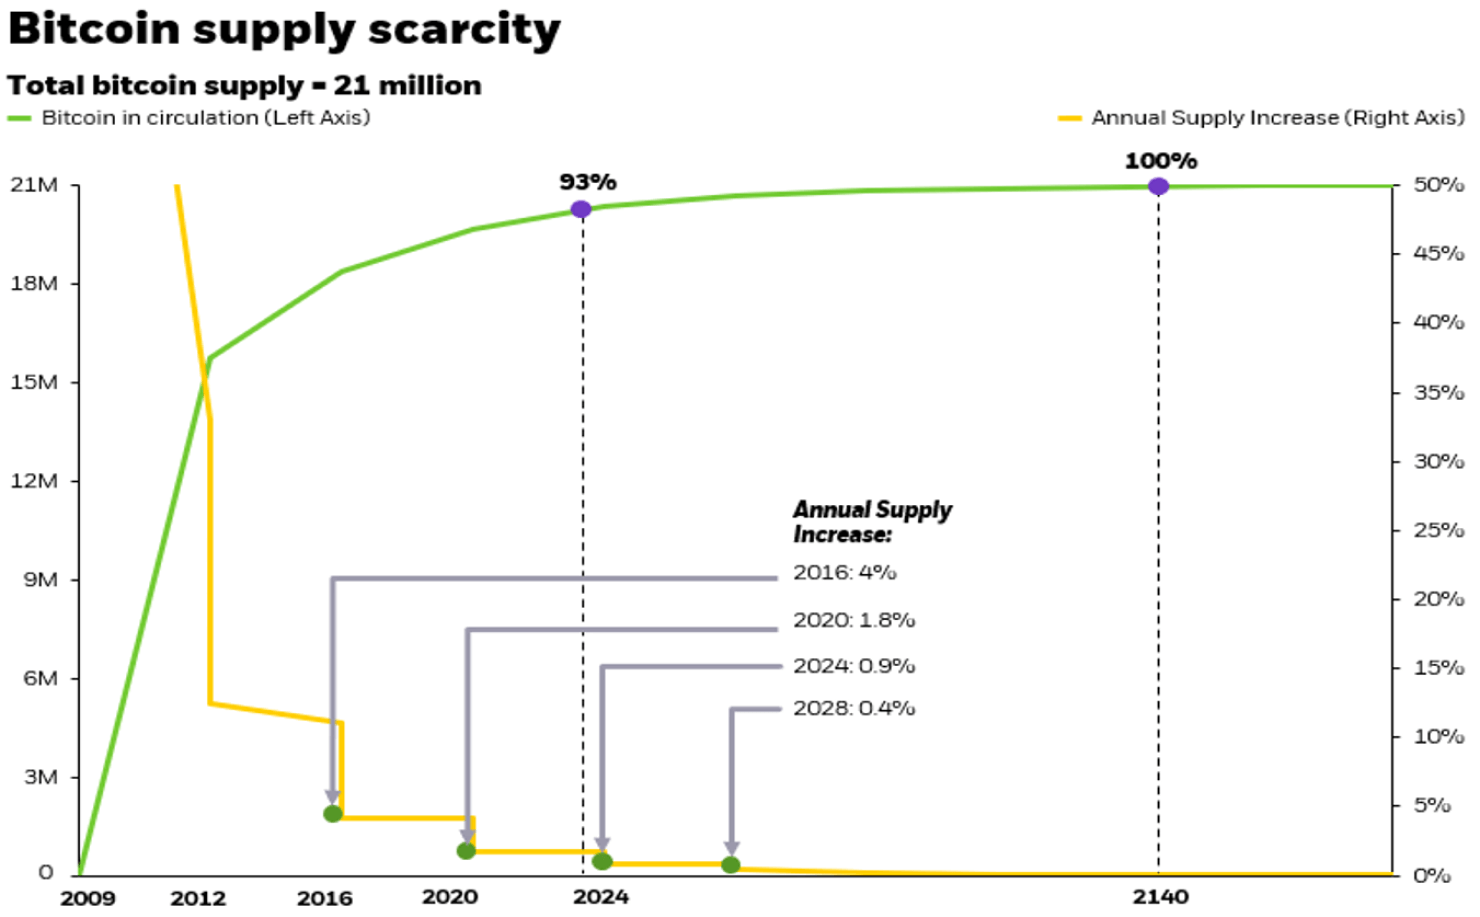 Chart showing bitcoin supply scarcity